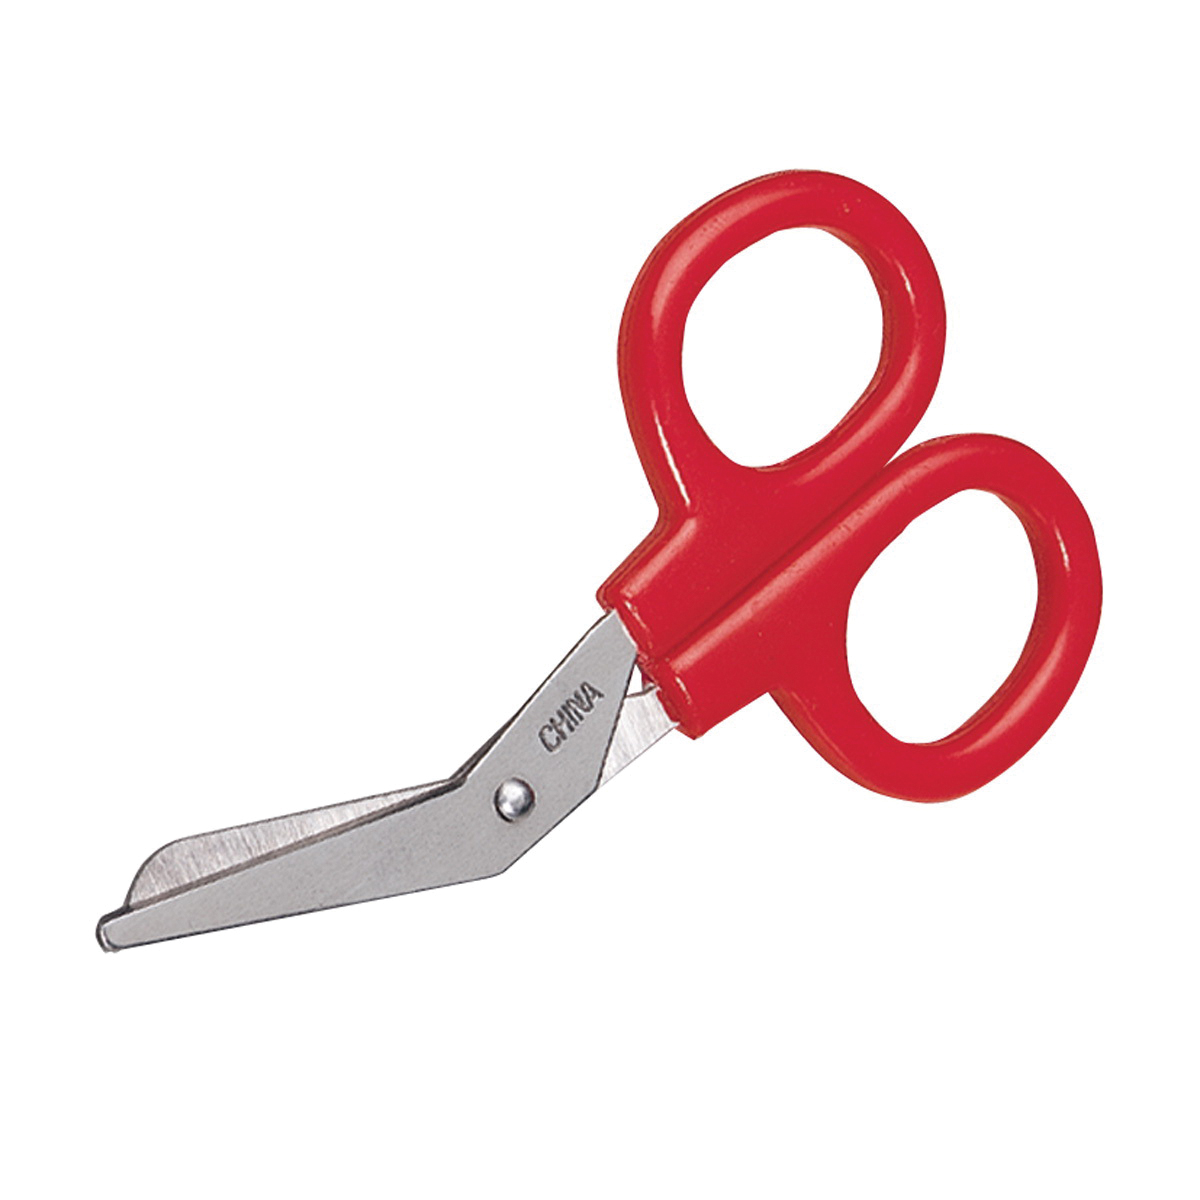 Buy Munix Orange Scissors With Safety Cover 128 mm Online at Best